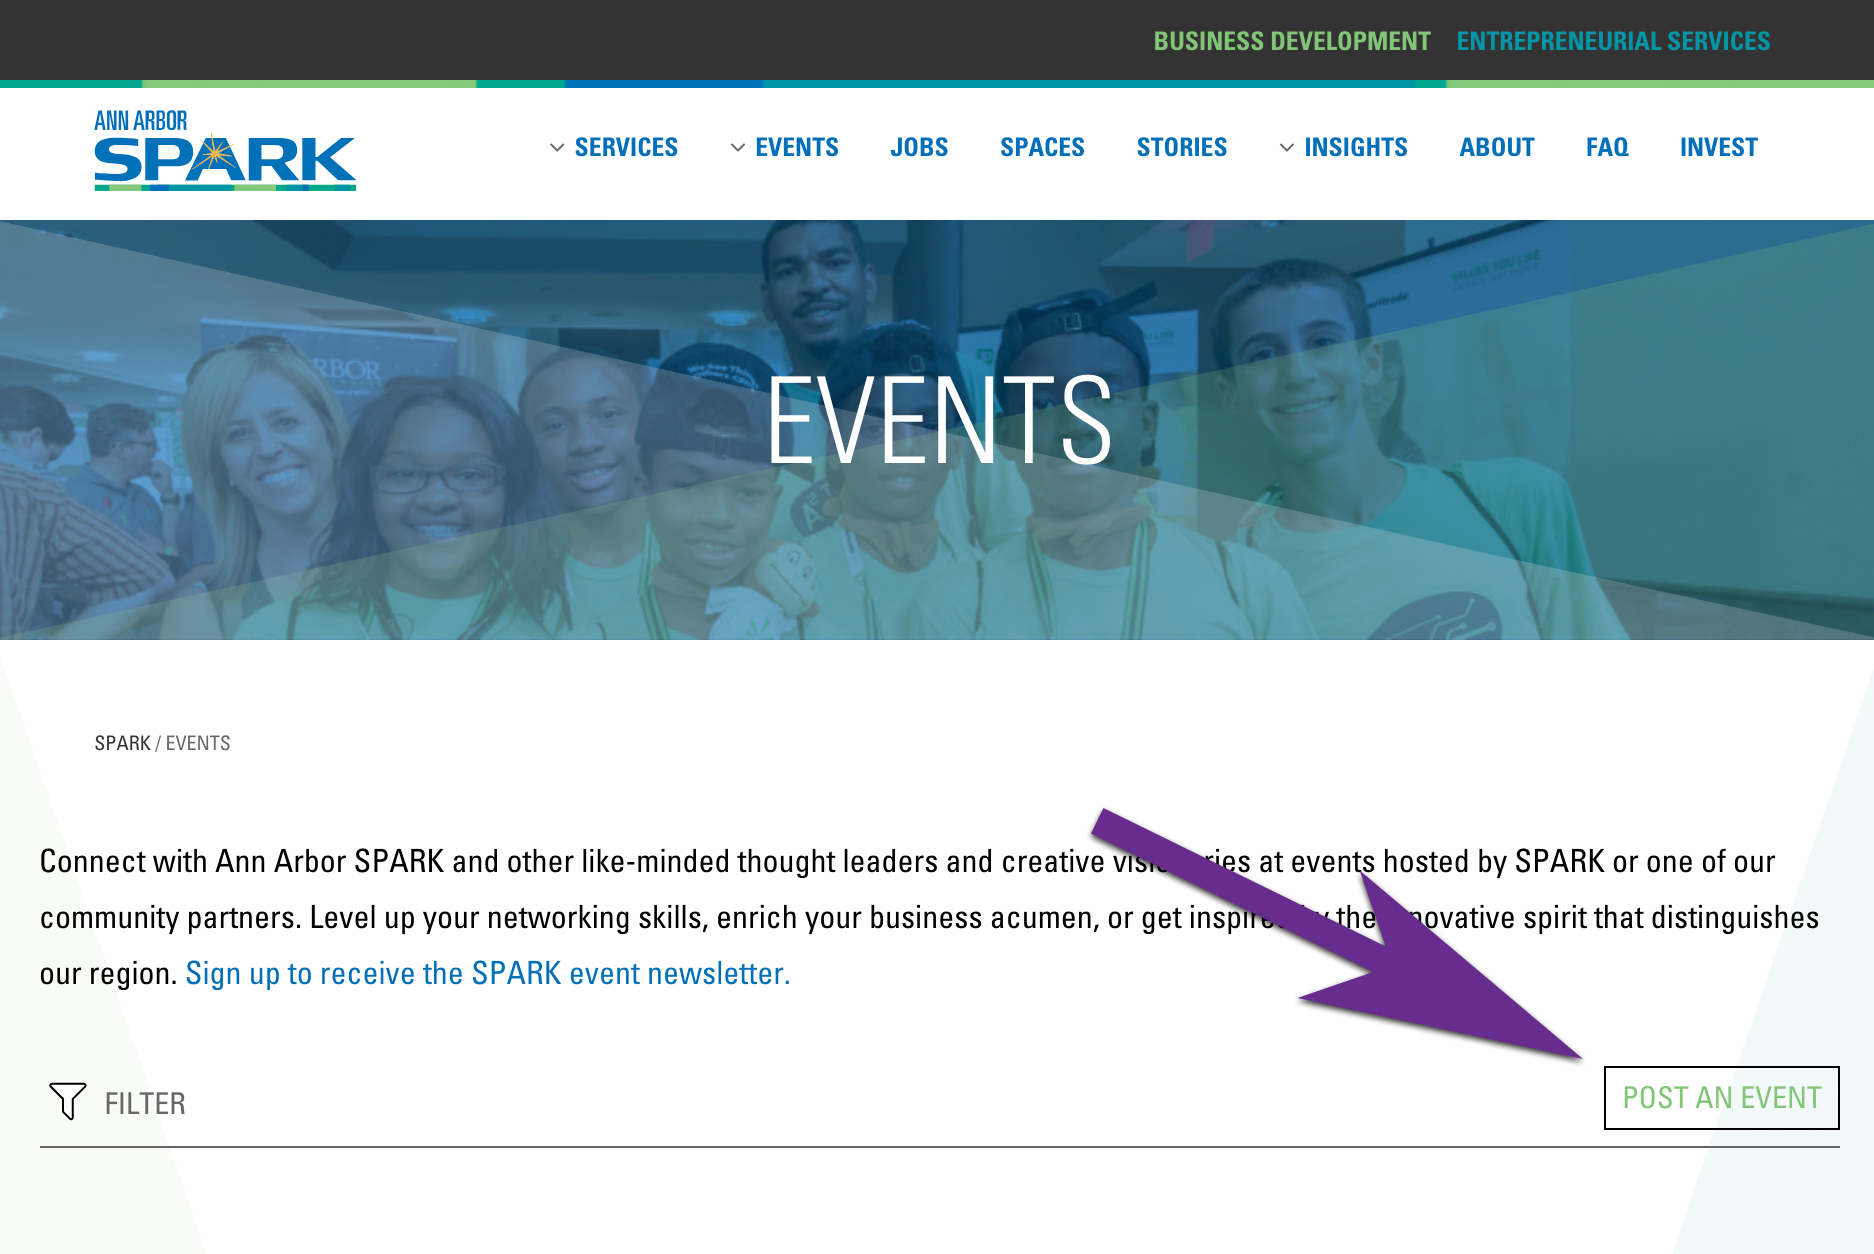 Quick Start Guide: Adding Your Event to the SPARK Calendar